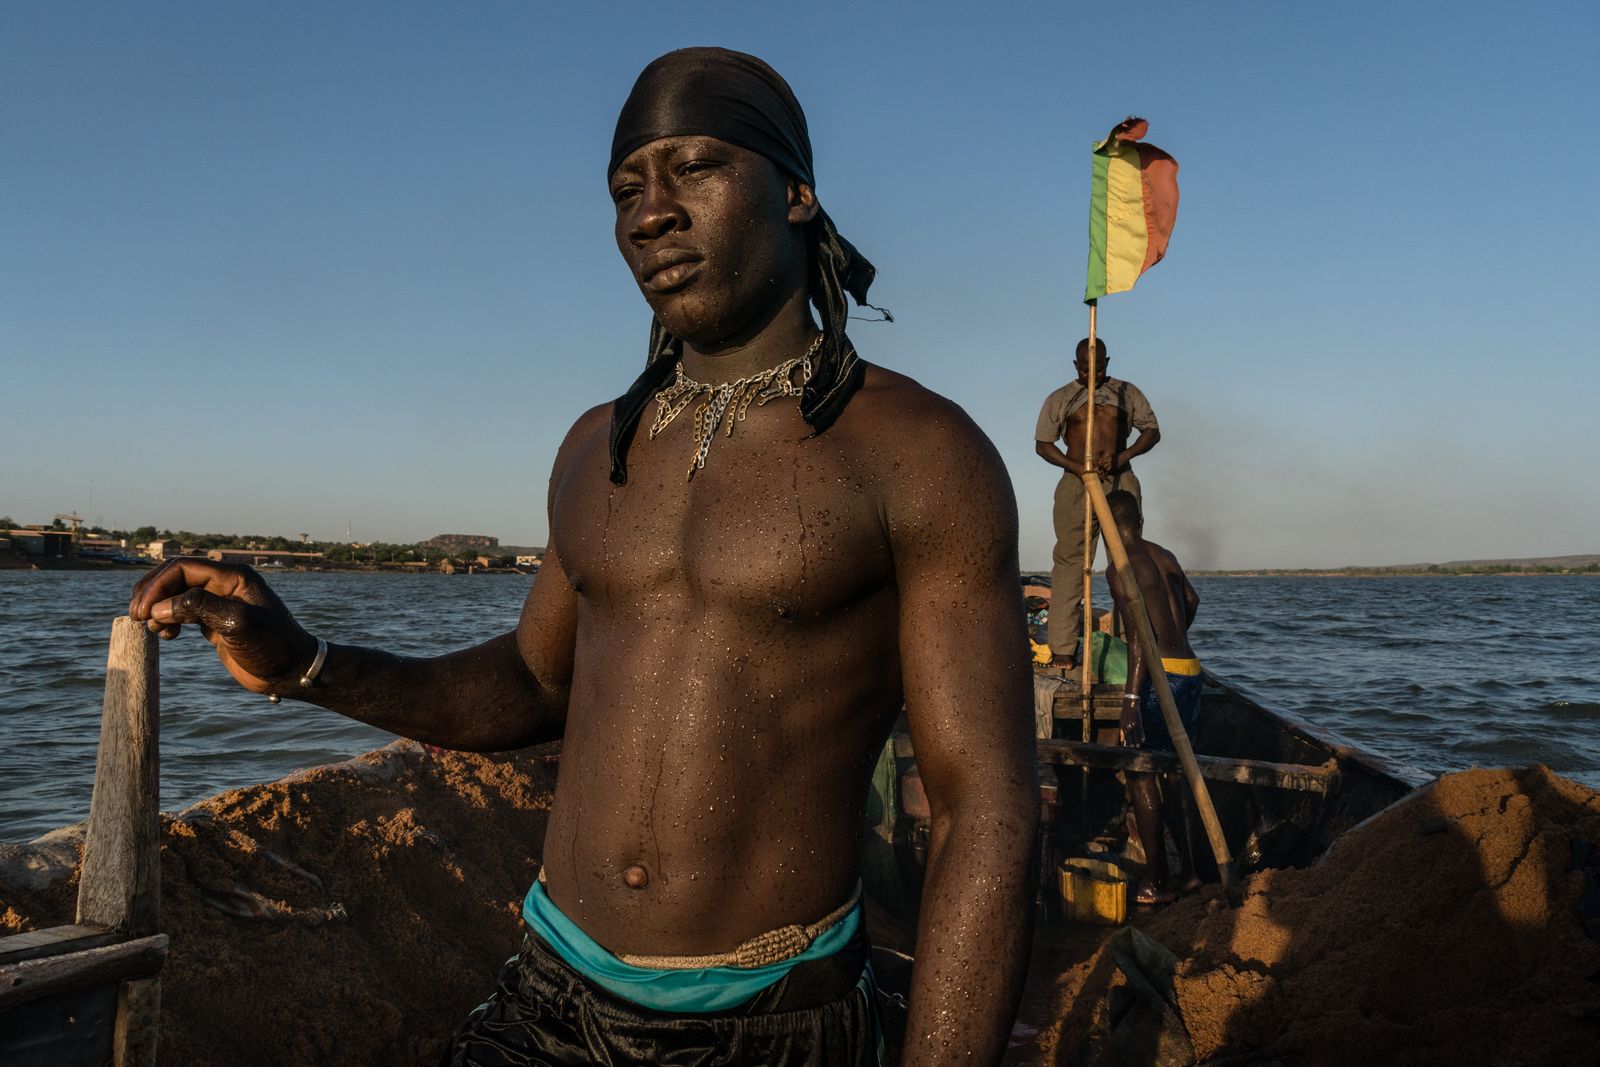 © Kristof Vadino - Image from the Mali Dislocated photography project